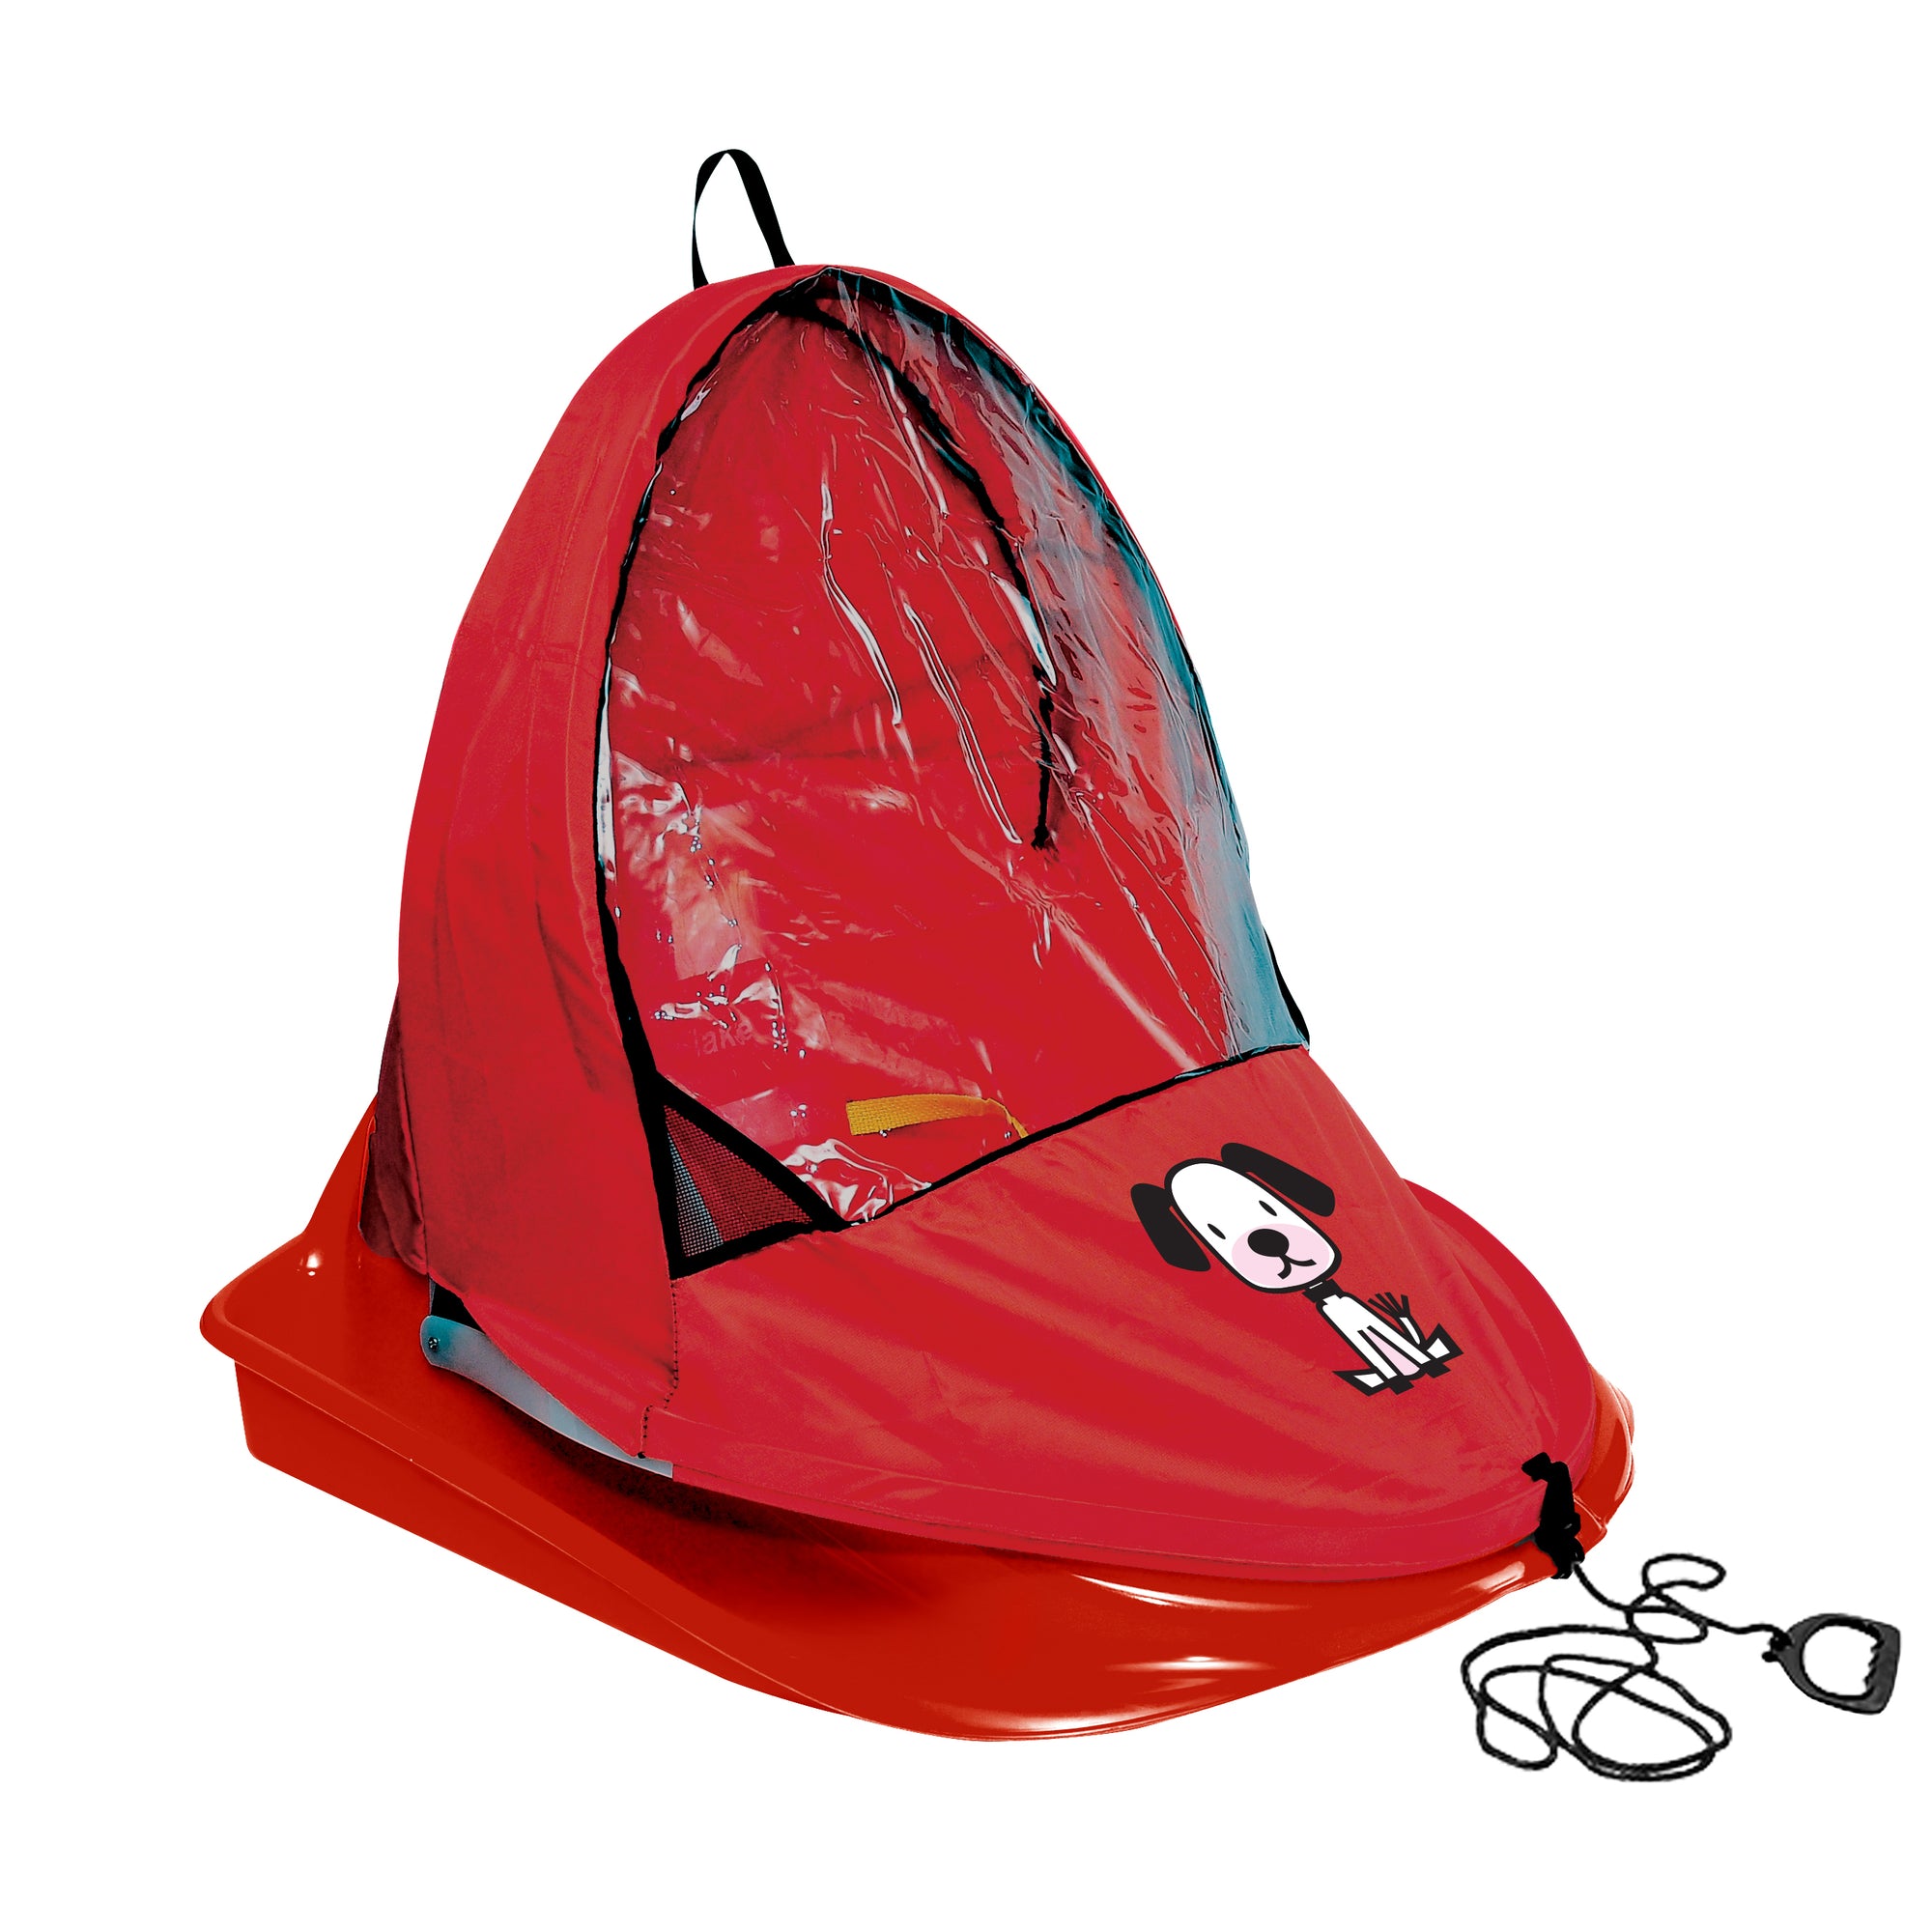 Snowflake Sled and Weather Shield Combo, Red